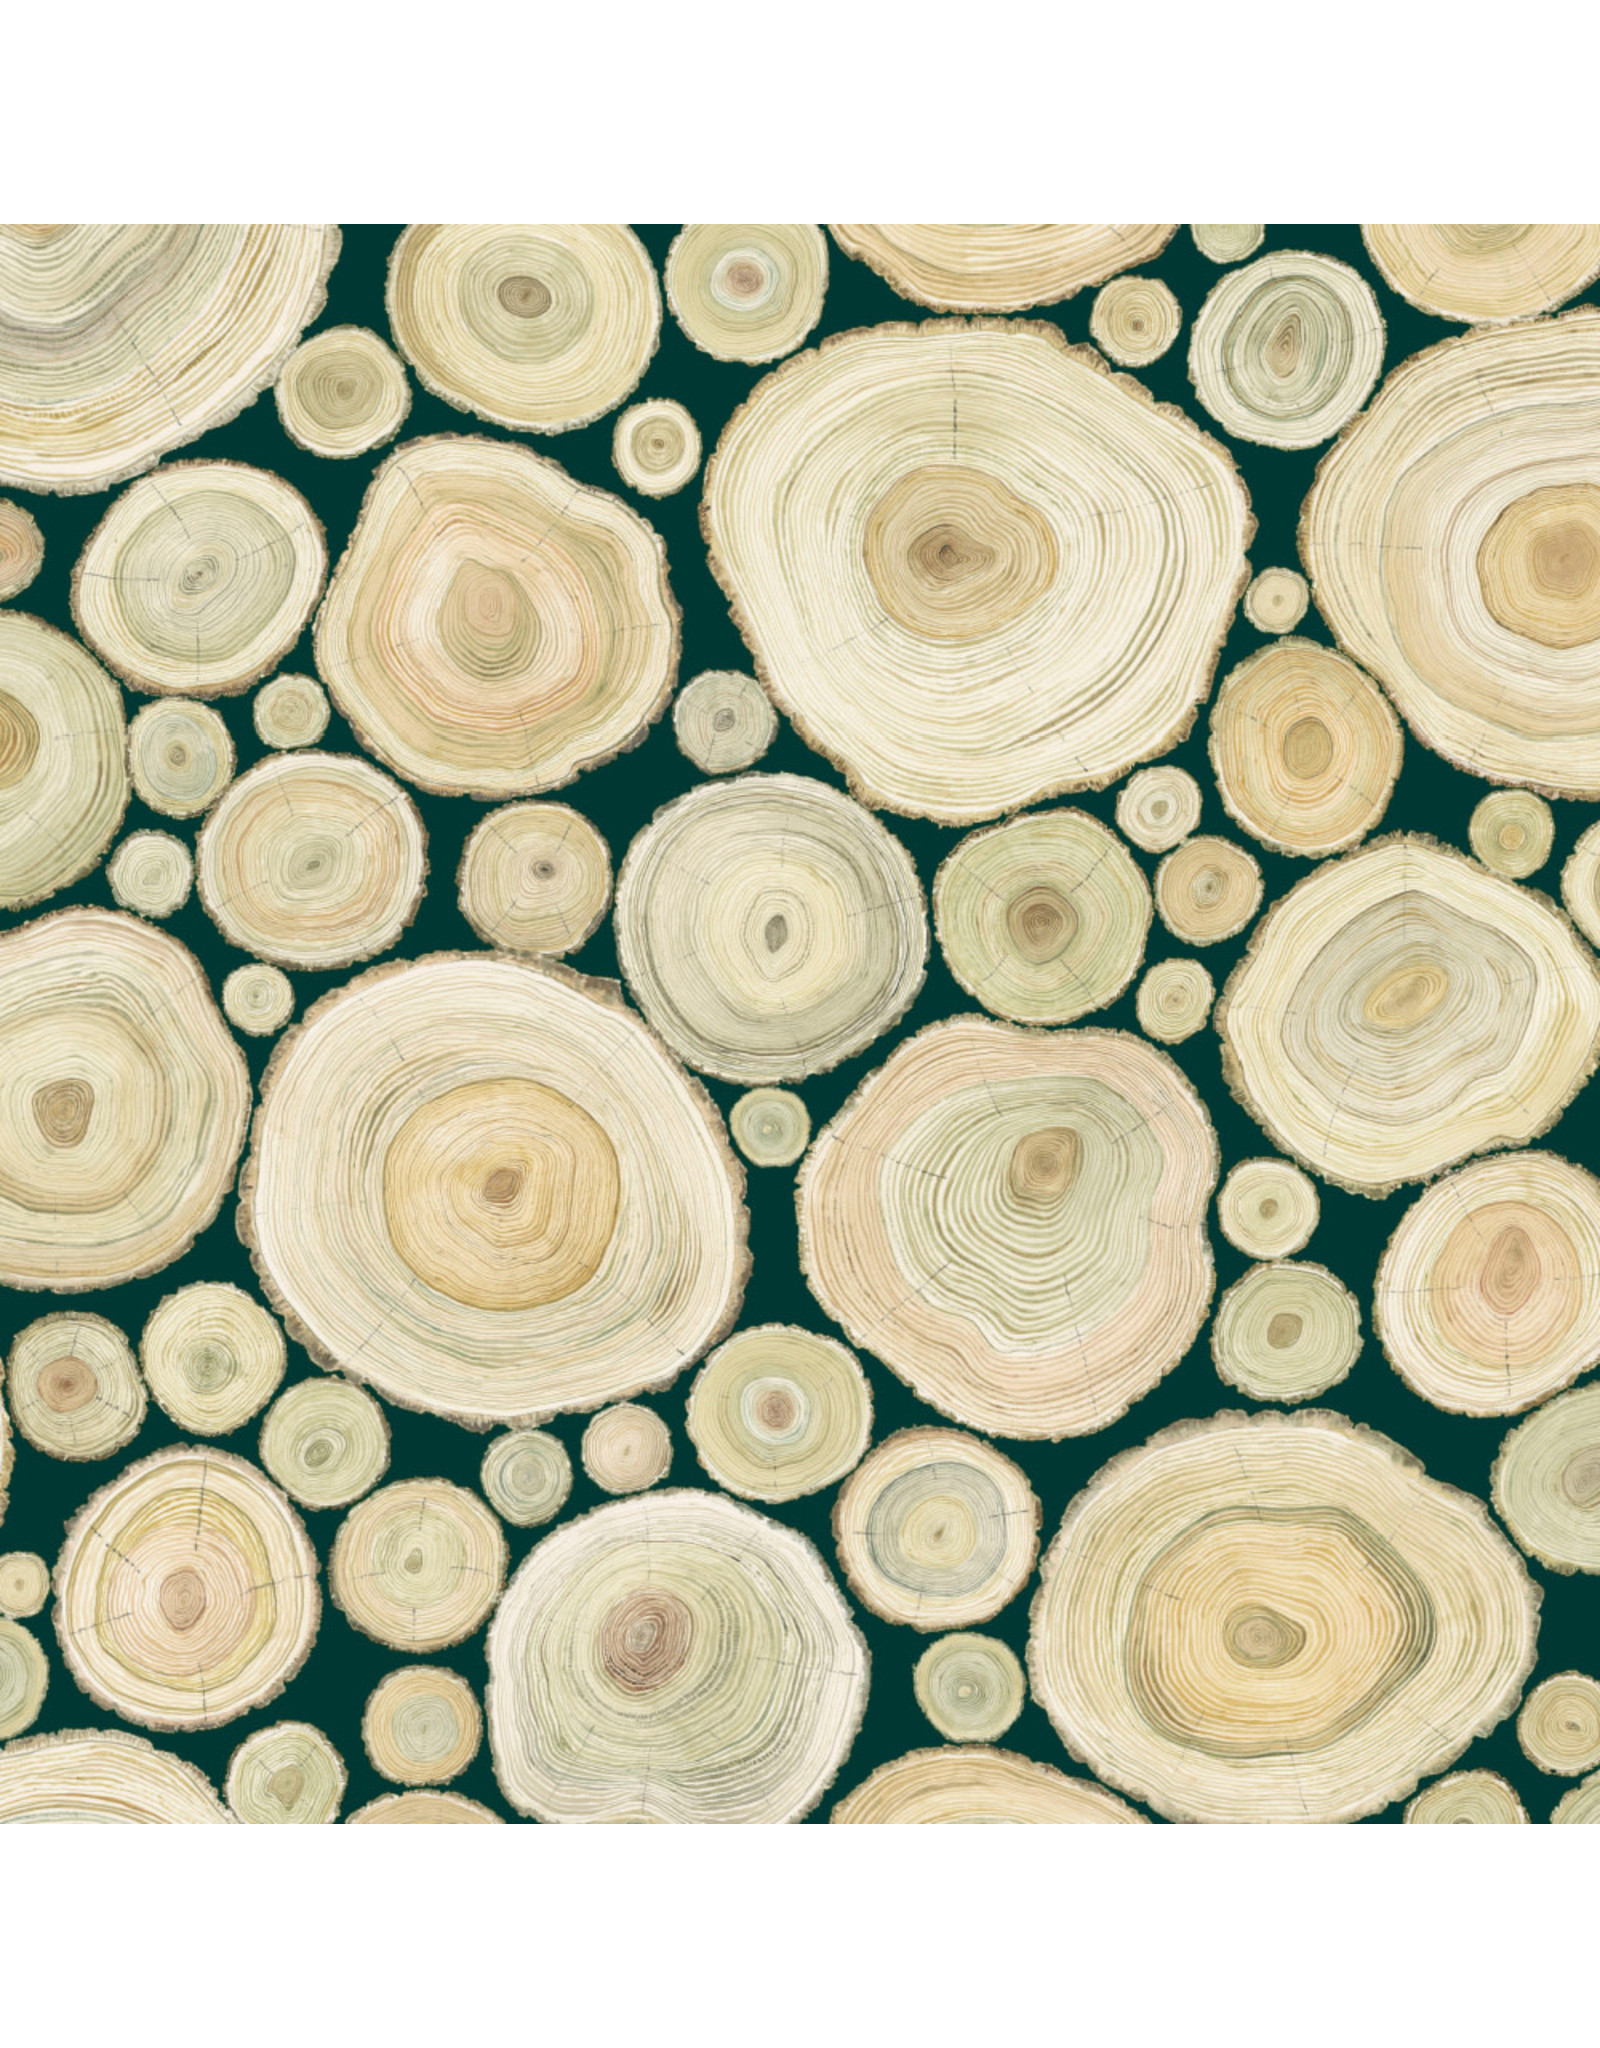 Free Spirit Woodland Blooms, Alnwick Logs in Forest, Fabric Half-Yards